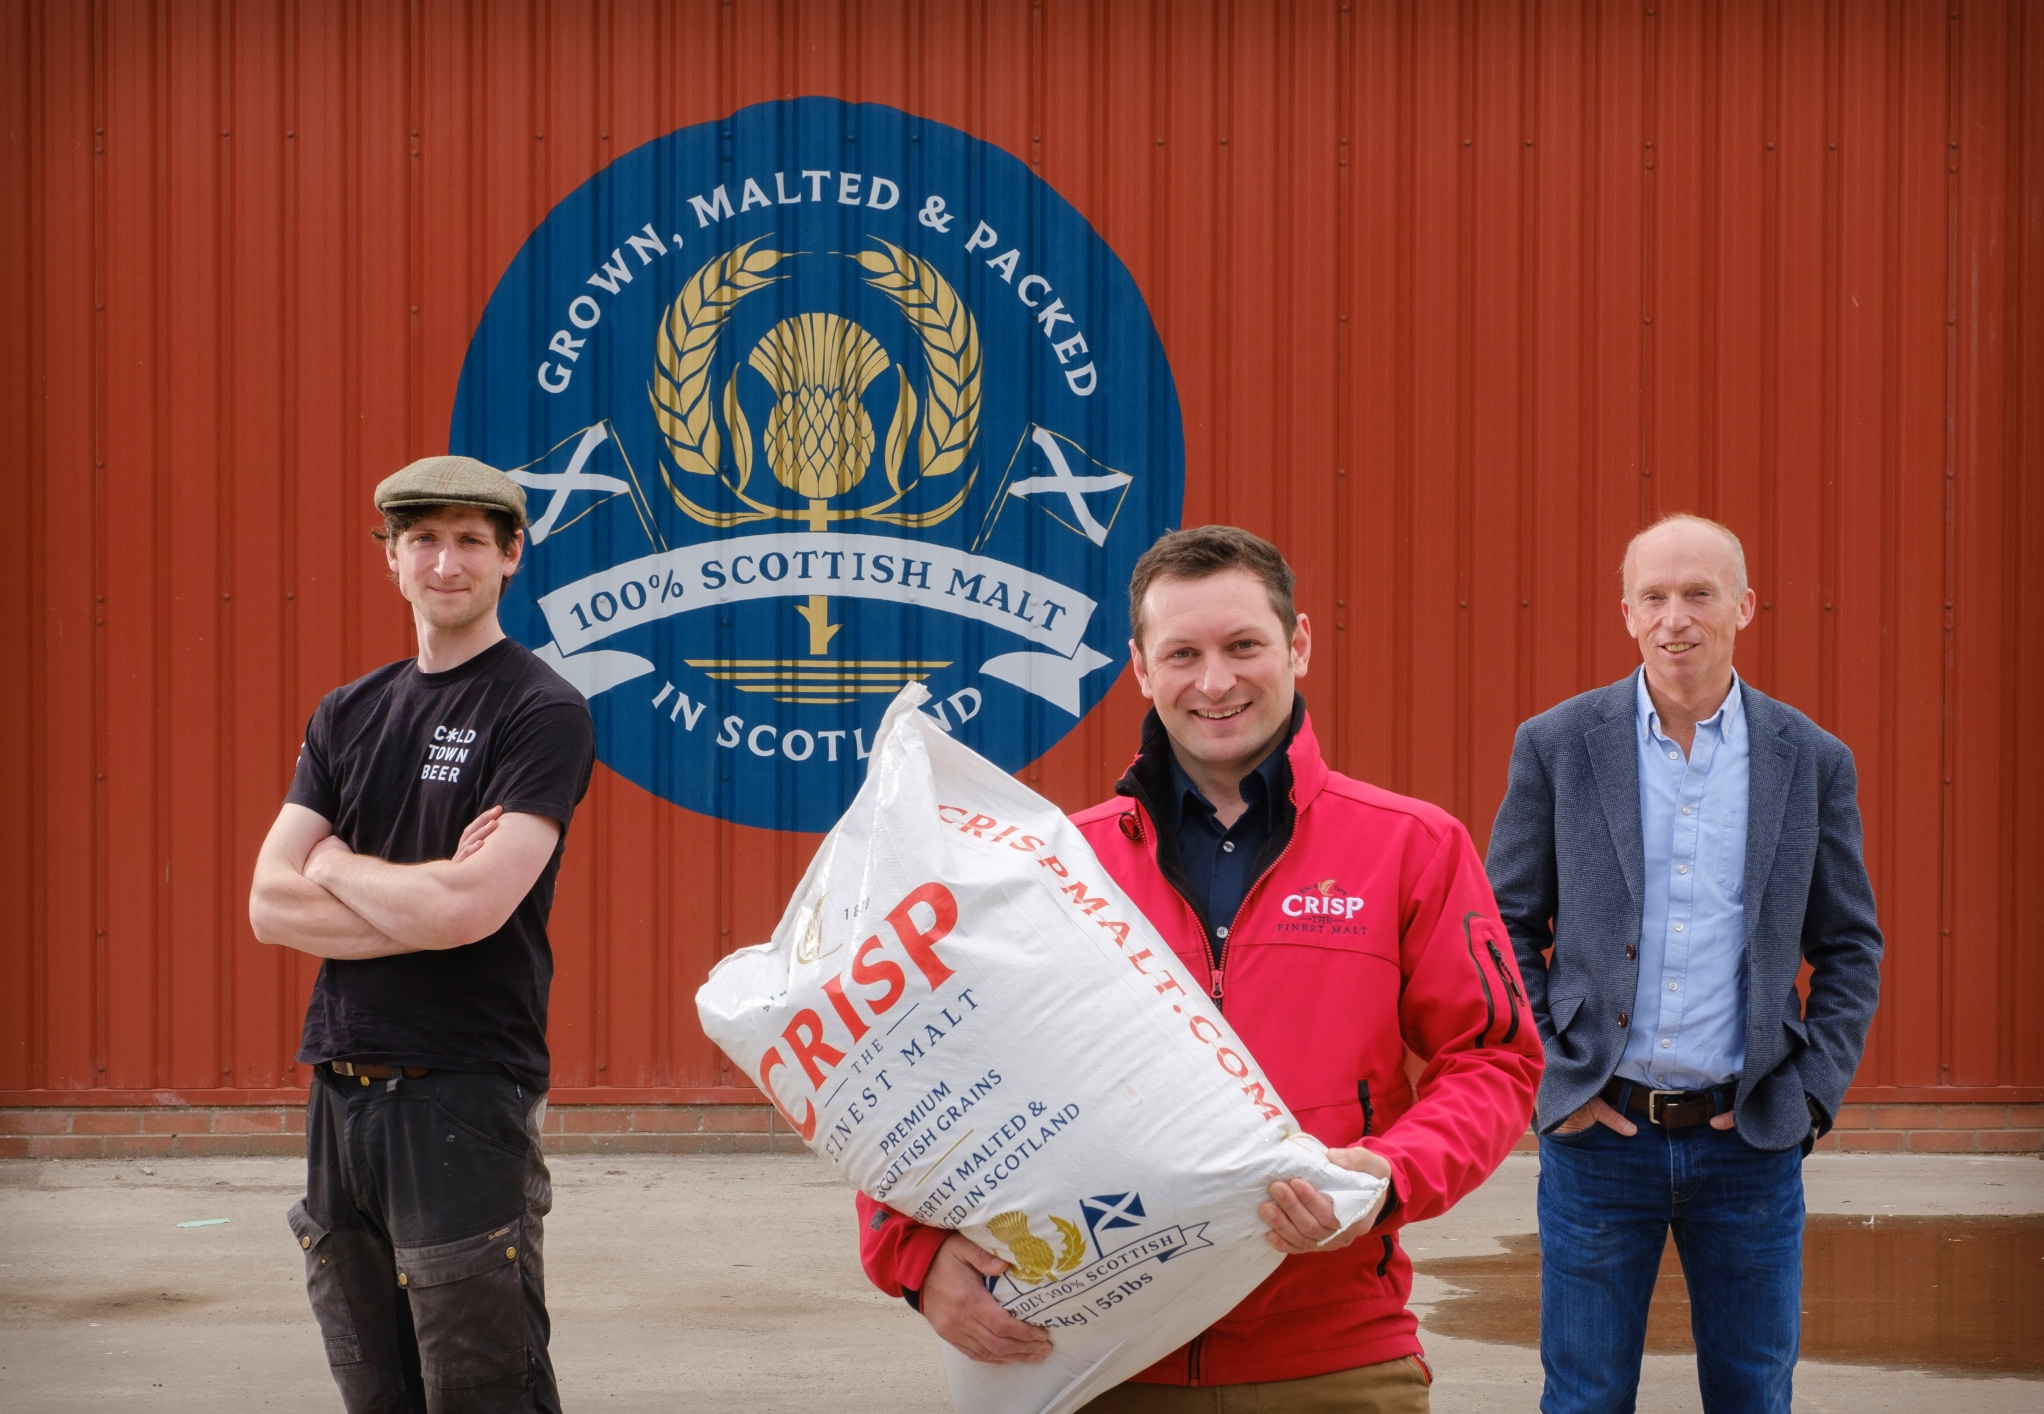 Malting in Alloa, Colin Johnson from Crisp Malt, and craft brewers Cold Town Beer stand in front of a hand painted 100% Scottish malt sign.